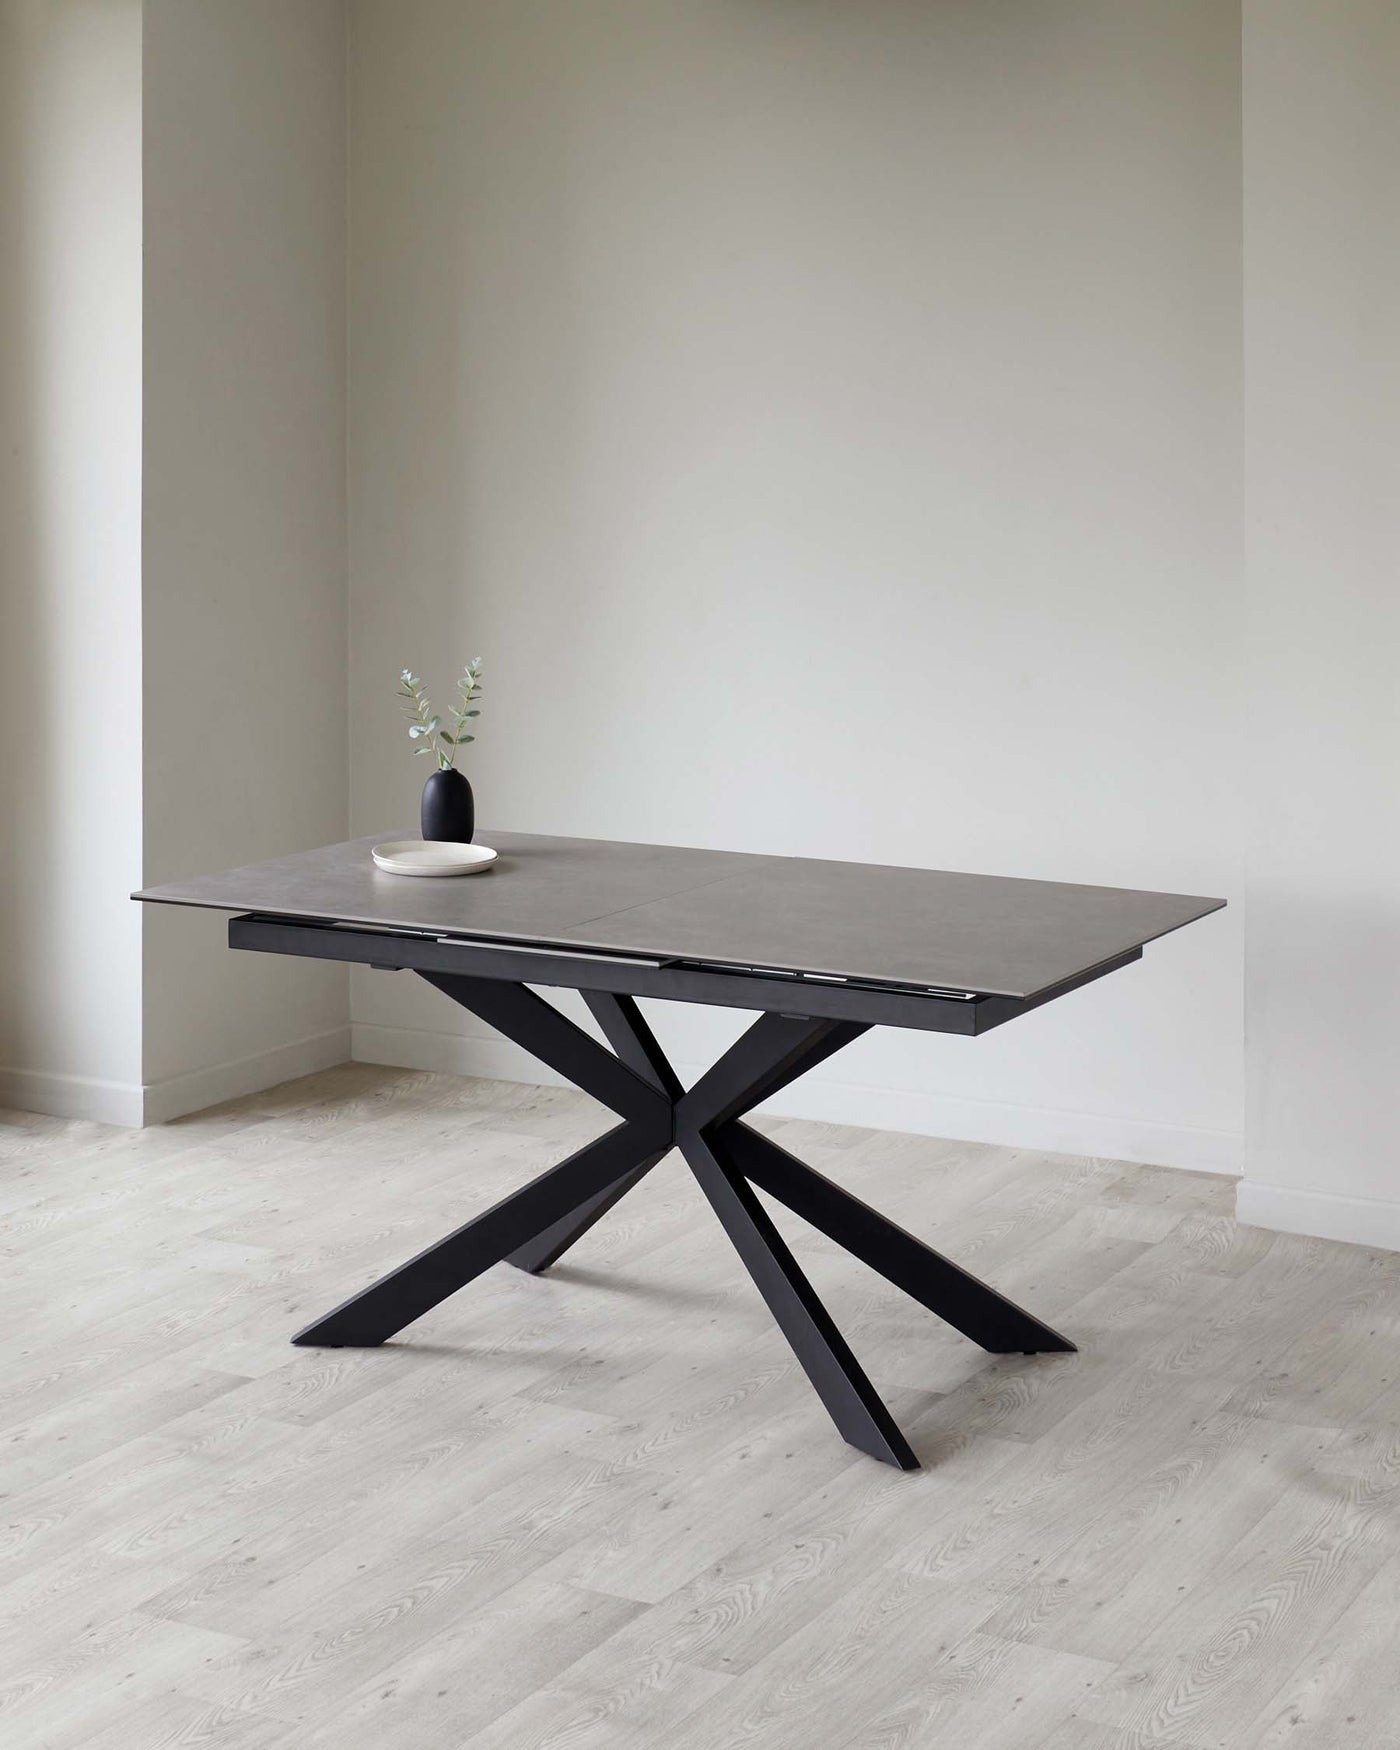 Modern minimalist rectangular dining table with a matte black tabletop and a sculptural black metal base, displayed in a room with light 